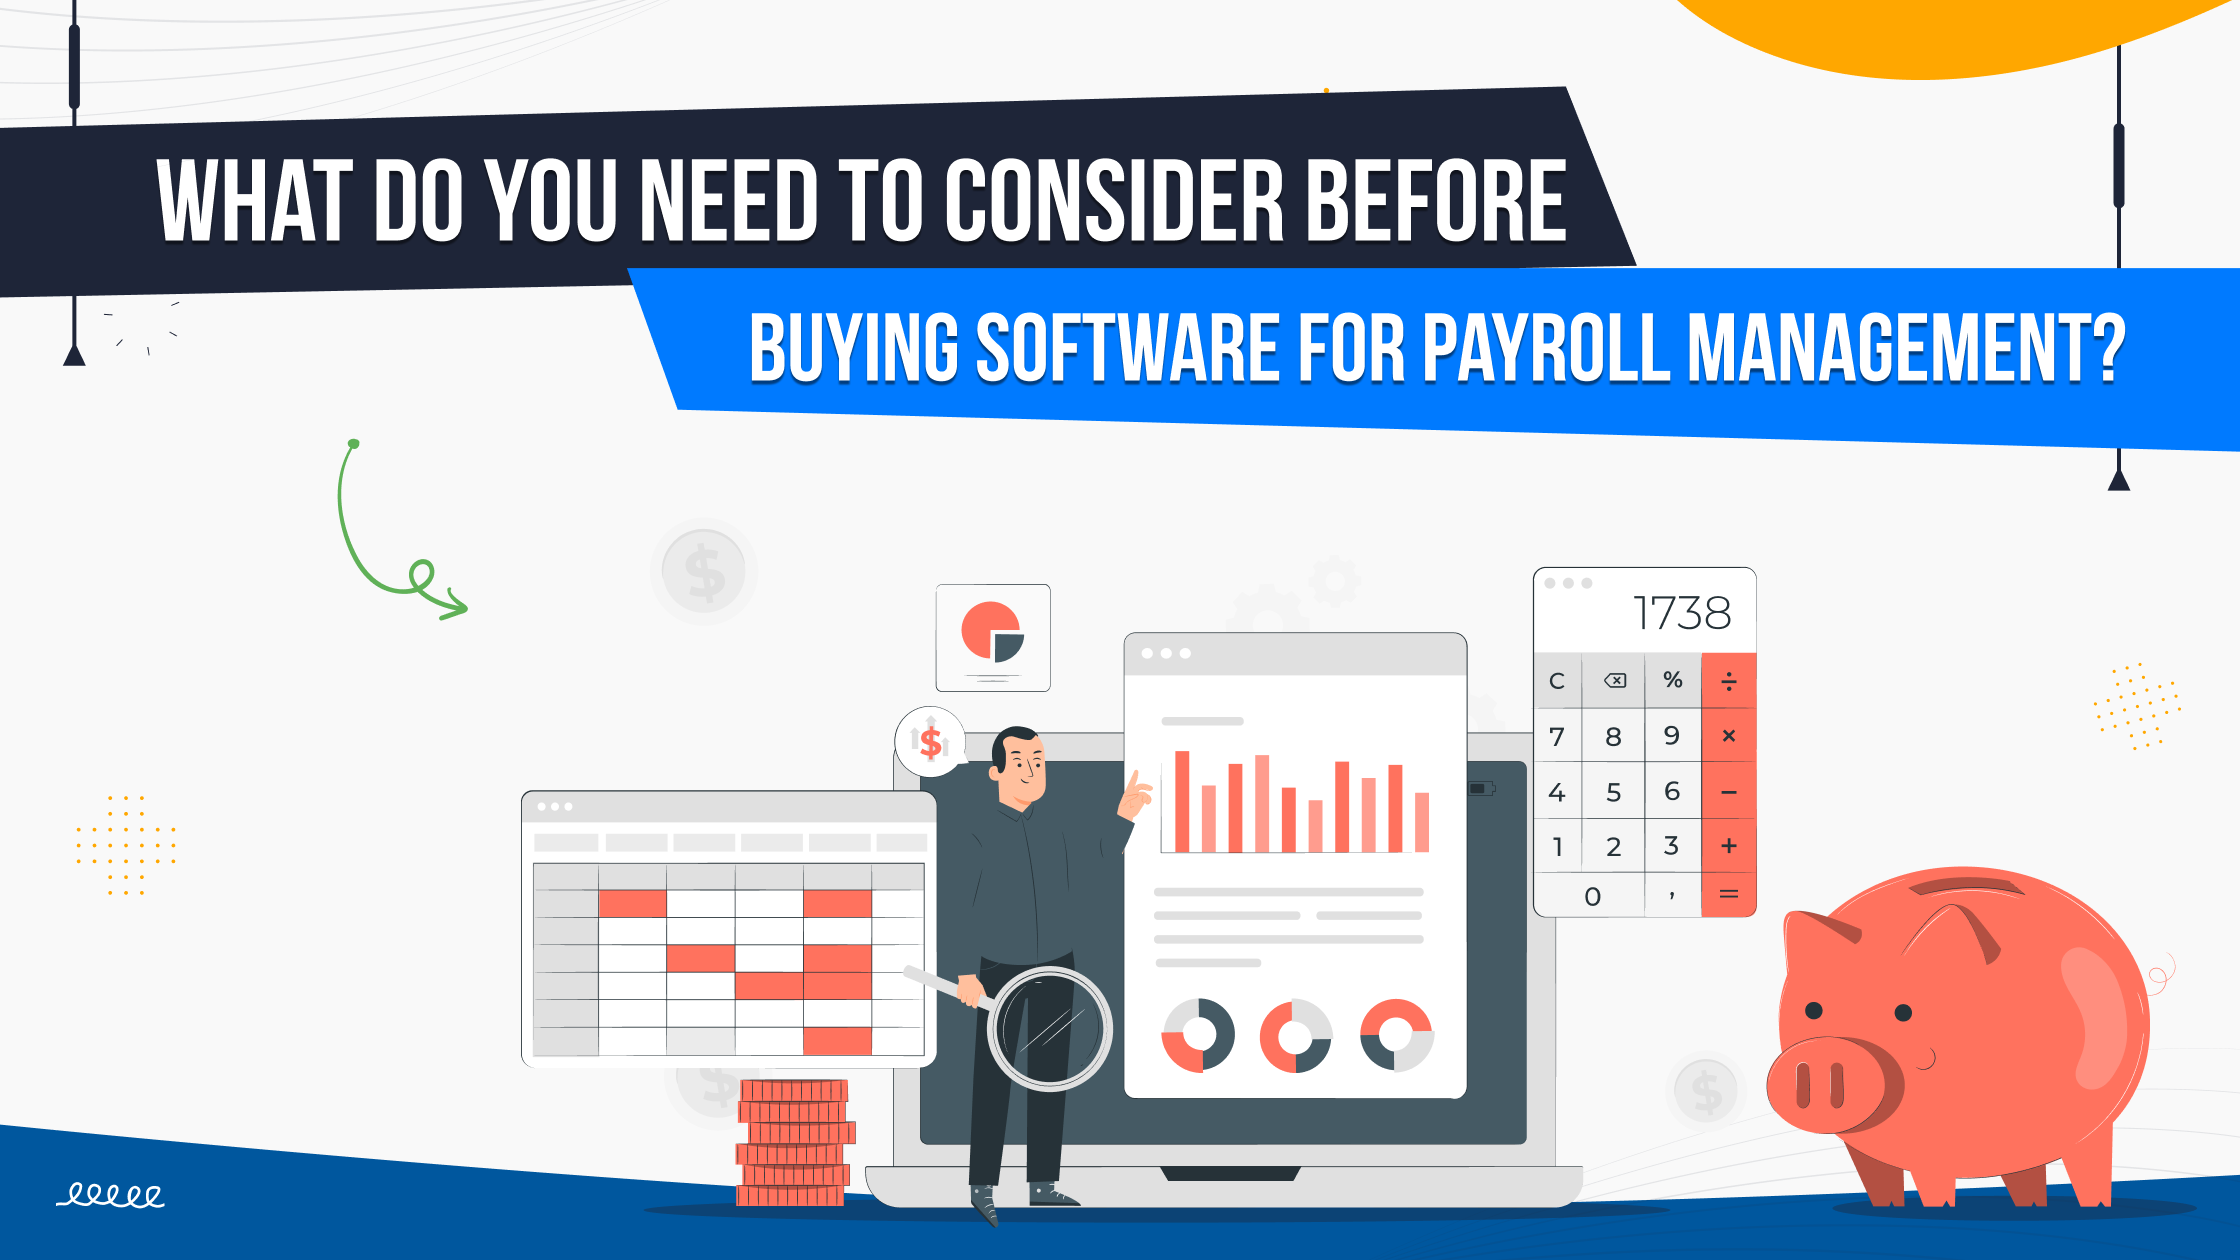 What Do You Need To Consider Before Buying Software For Payroll Management